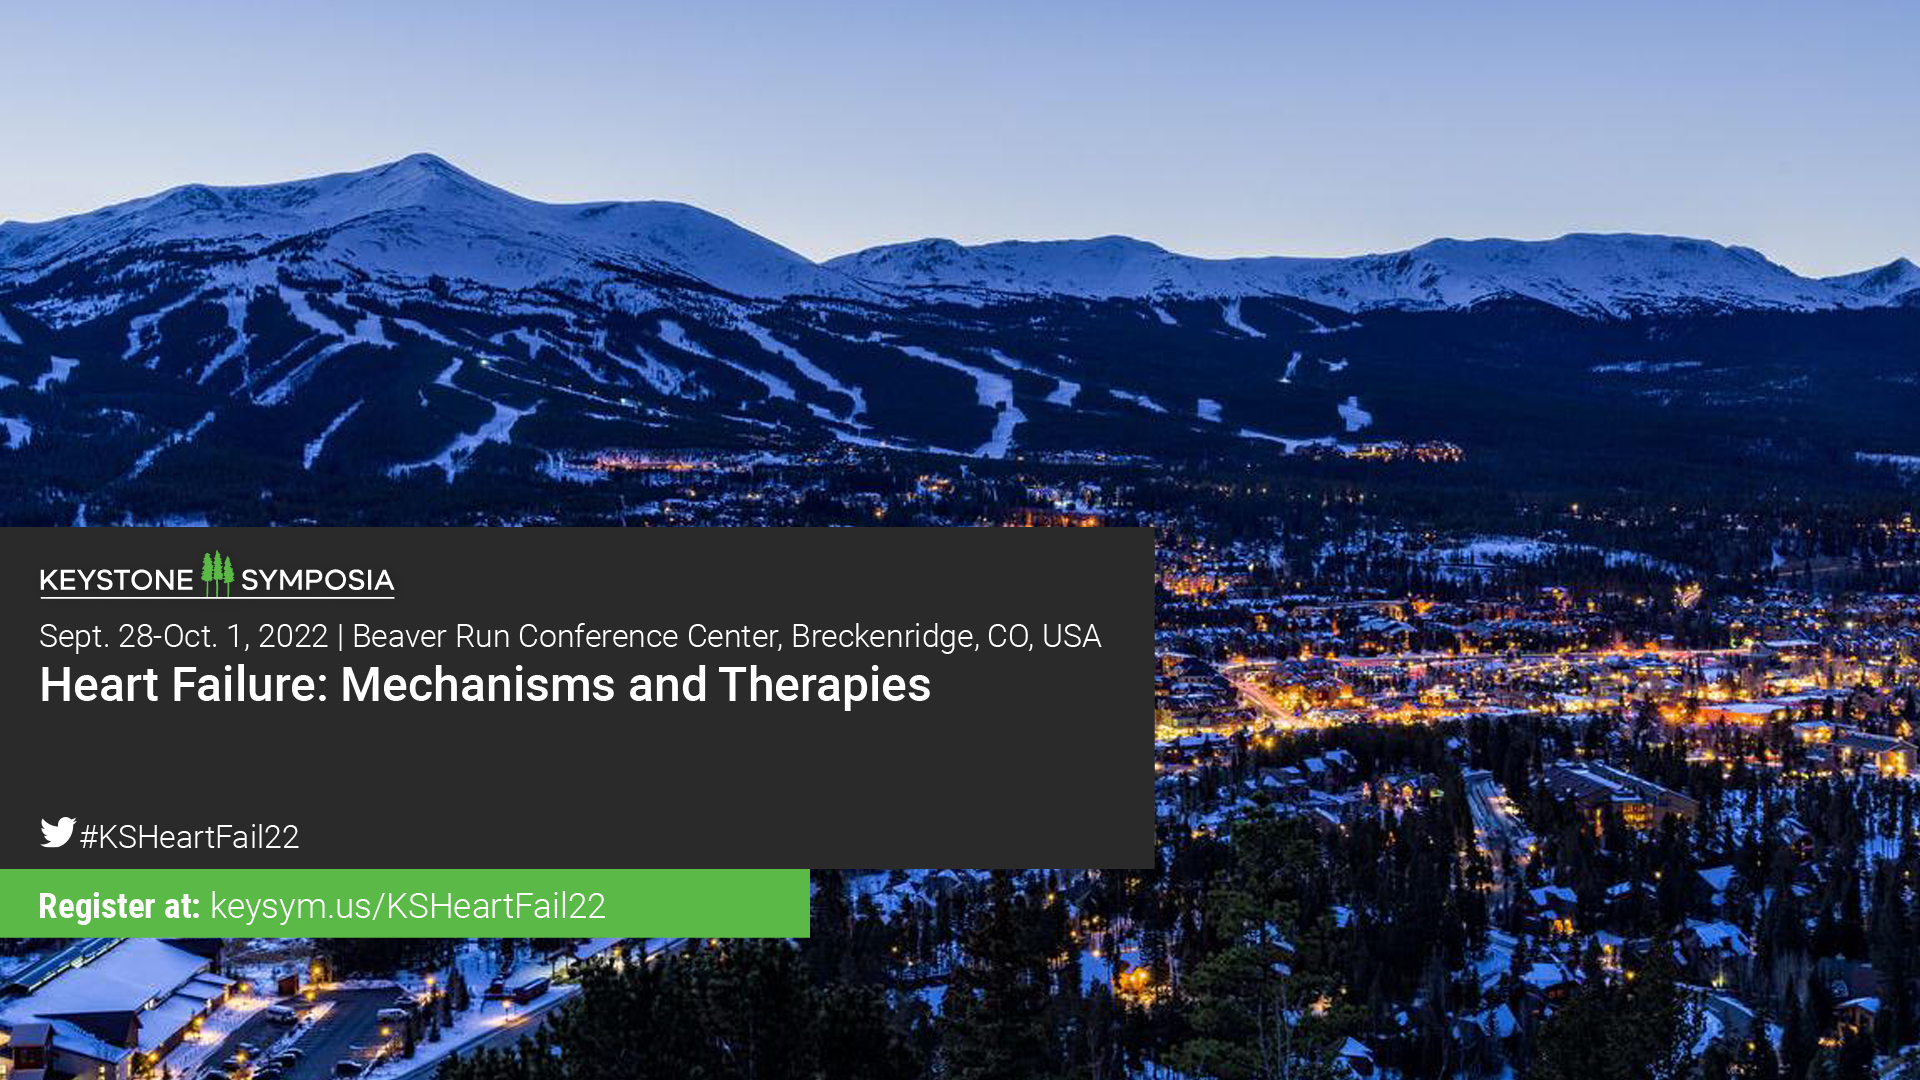 Keystone Symposia takes place October 6th — 10th 2019 at the